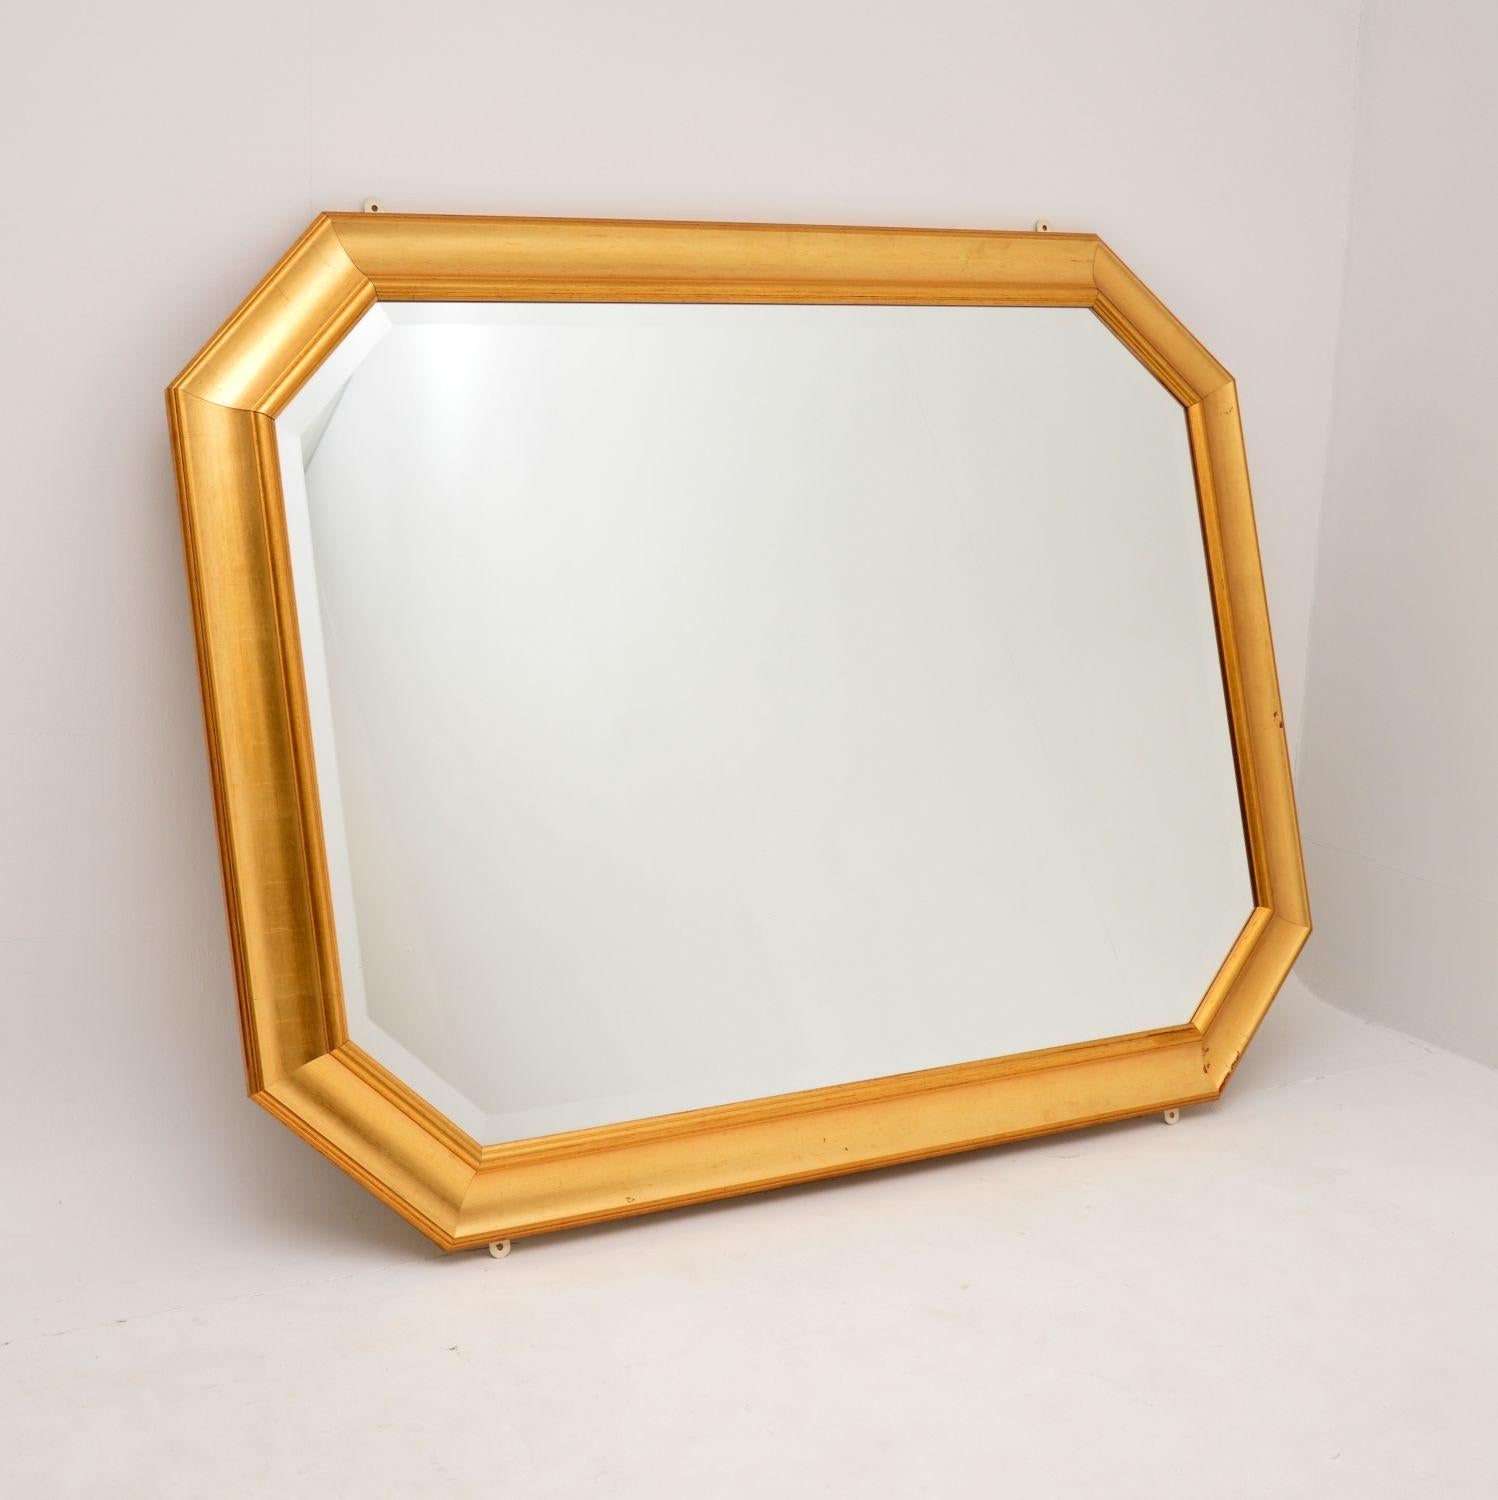 A fine quality and very large vintage gilt wood mirror. This was made in England, it dates from around the 1970-80’s.

This is beautifully made and is very impressive. It has bevelled glass which is in great condition. The gilt wood frame is